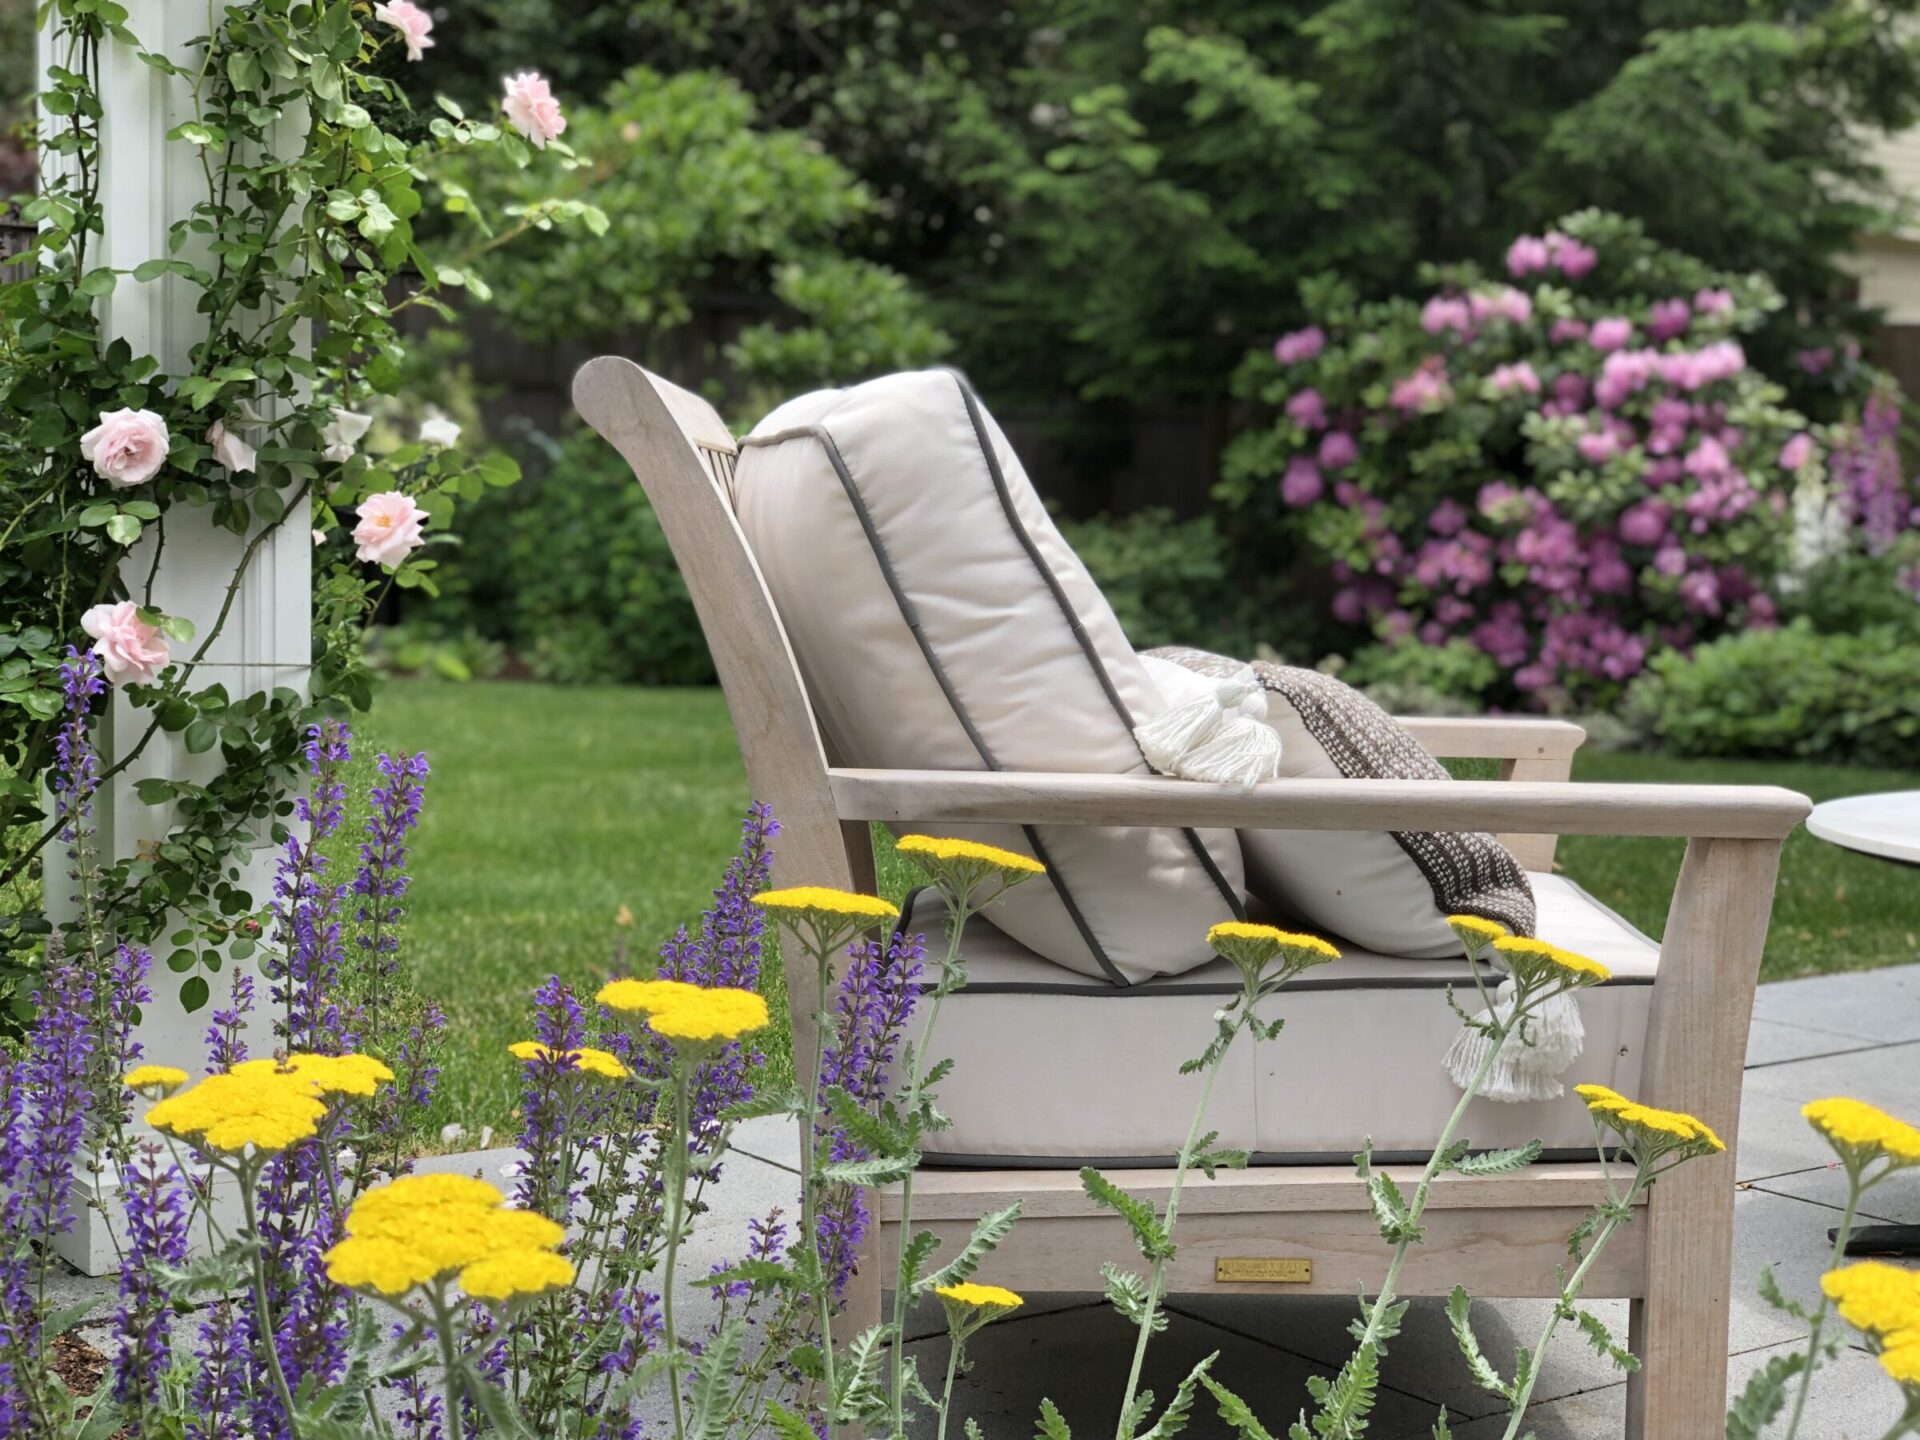 A serene garden with a comfortable wooden chair surrounded by vibrant flowers, including pink roses and yellow blooms, invoking a sense of tranquility.